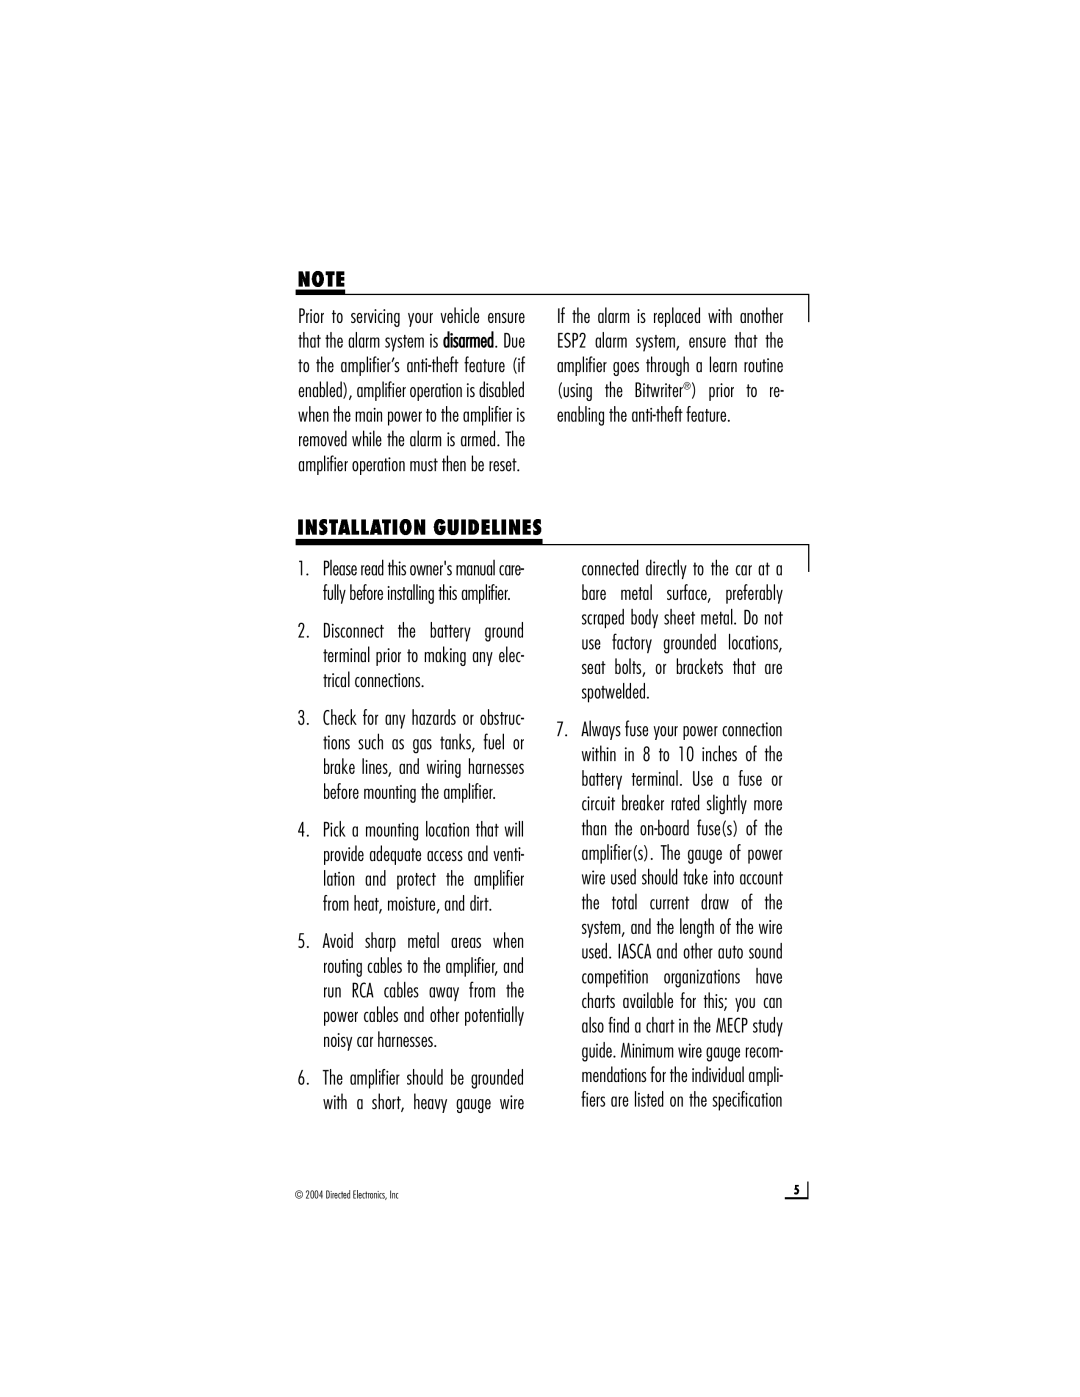 Directed Electronics A802, A1004, D2205 owner manual Installation Guidelines 